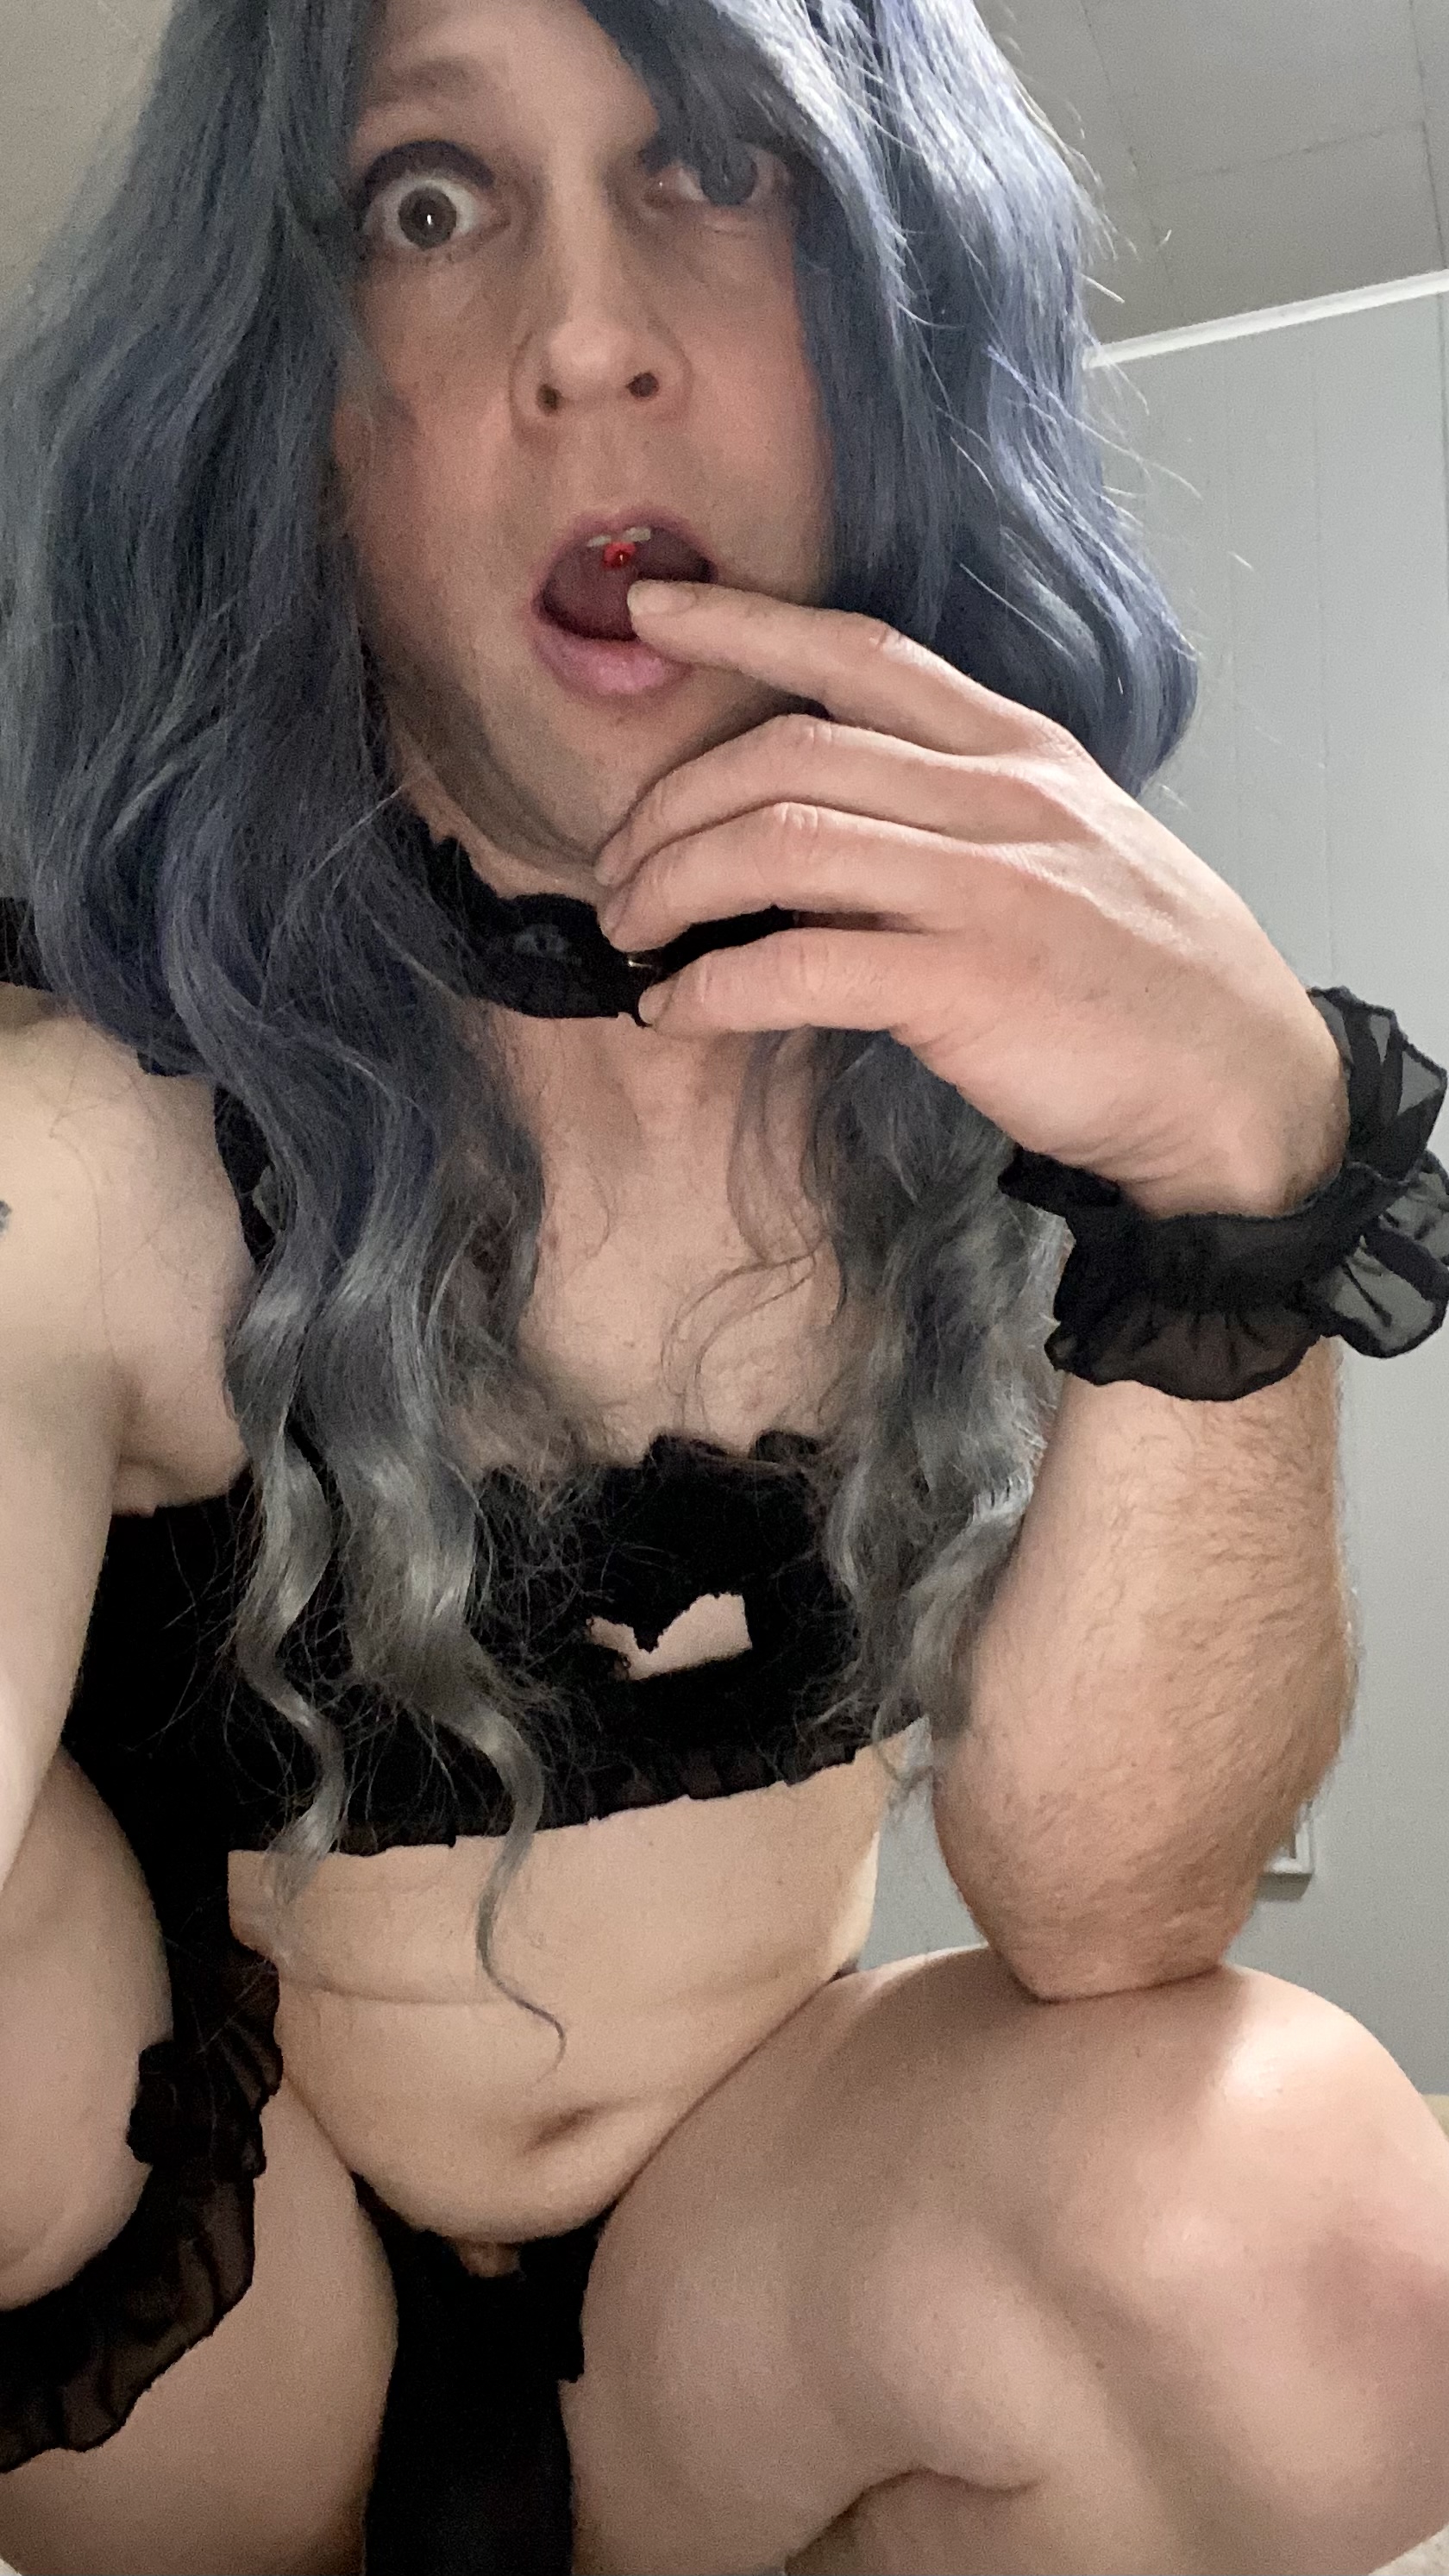 Exposed sissy for humiliation